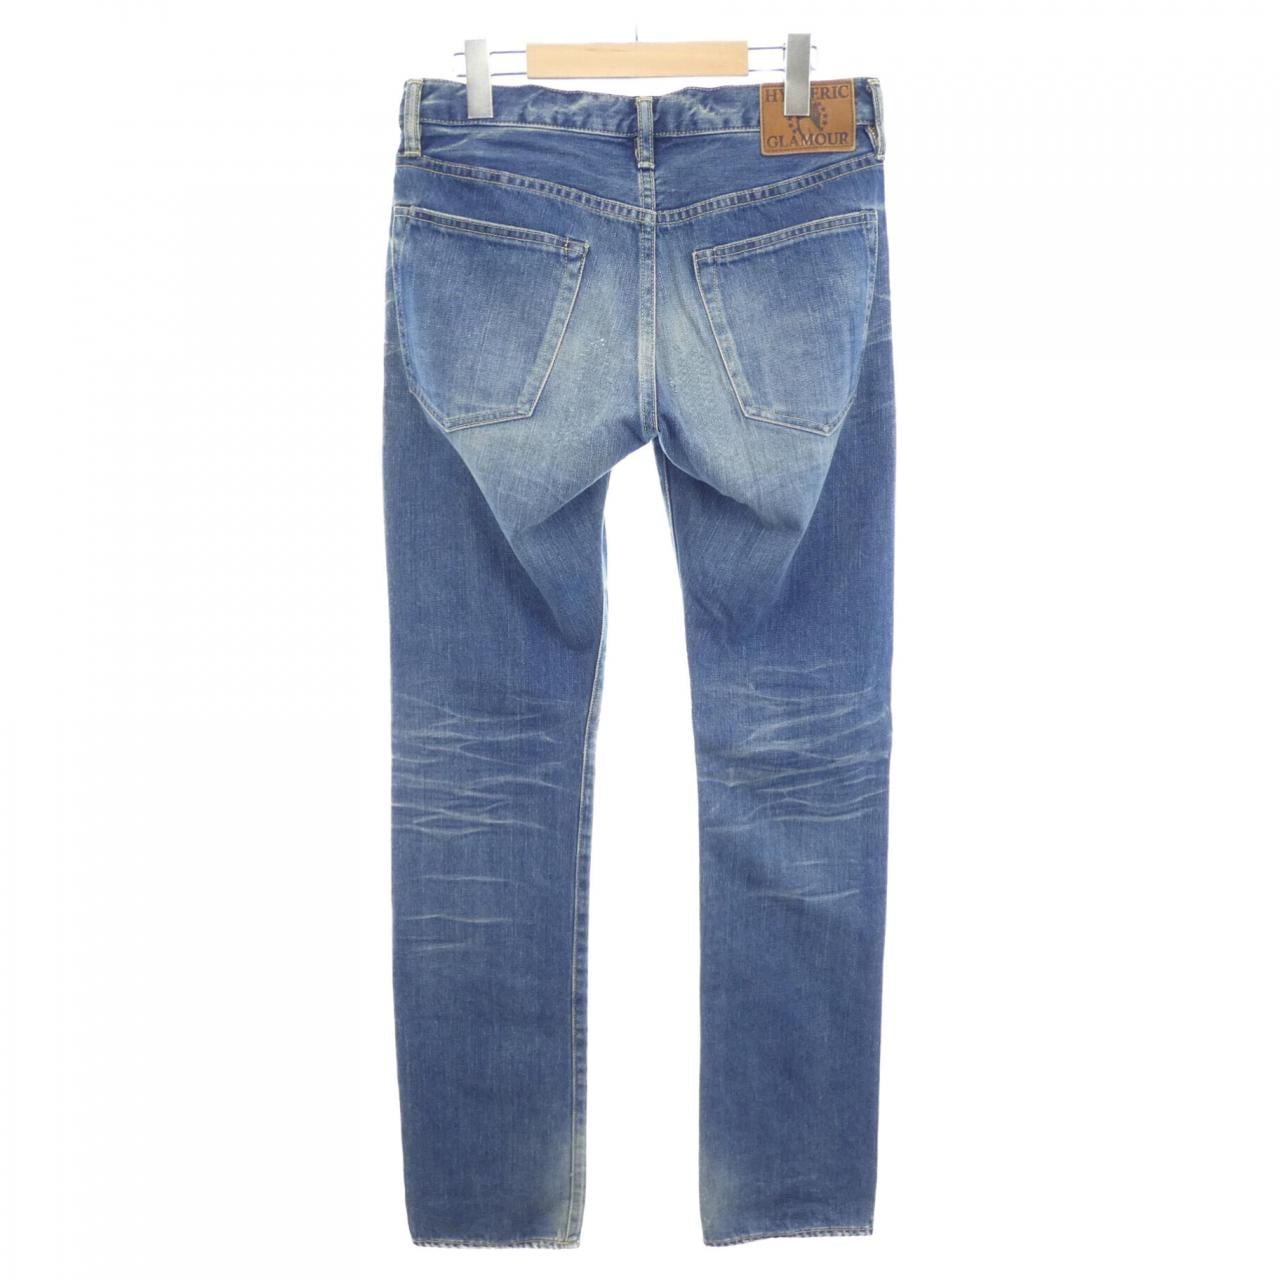 HYSTERIC GLAMOR jeans